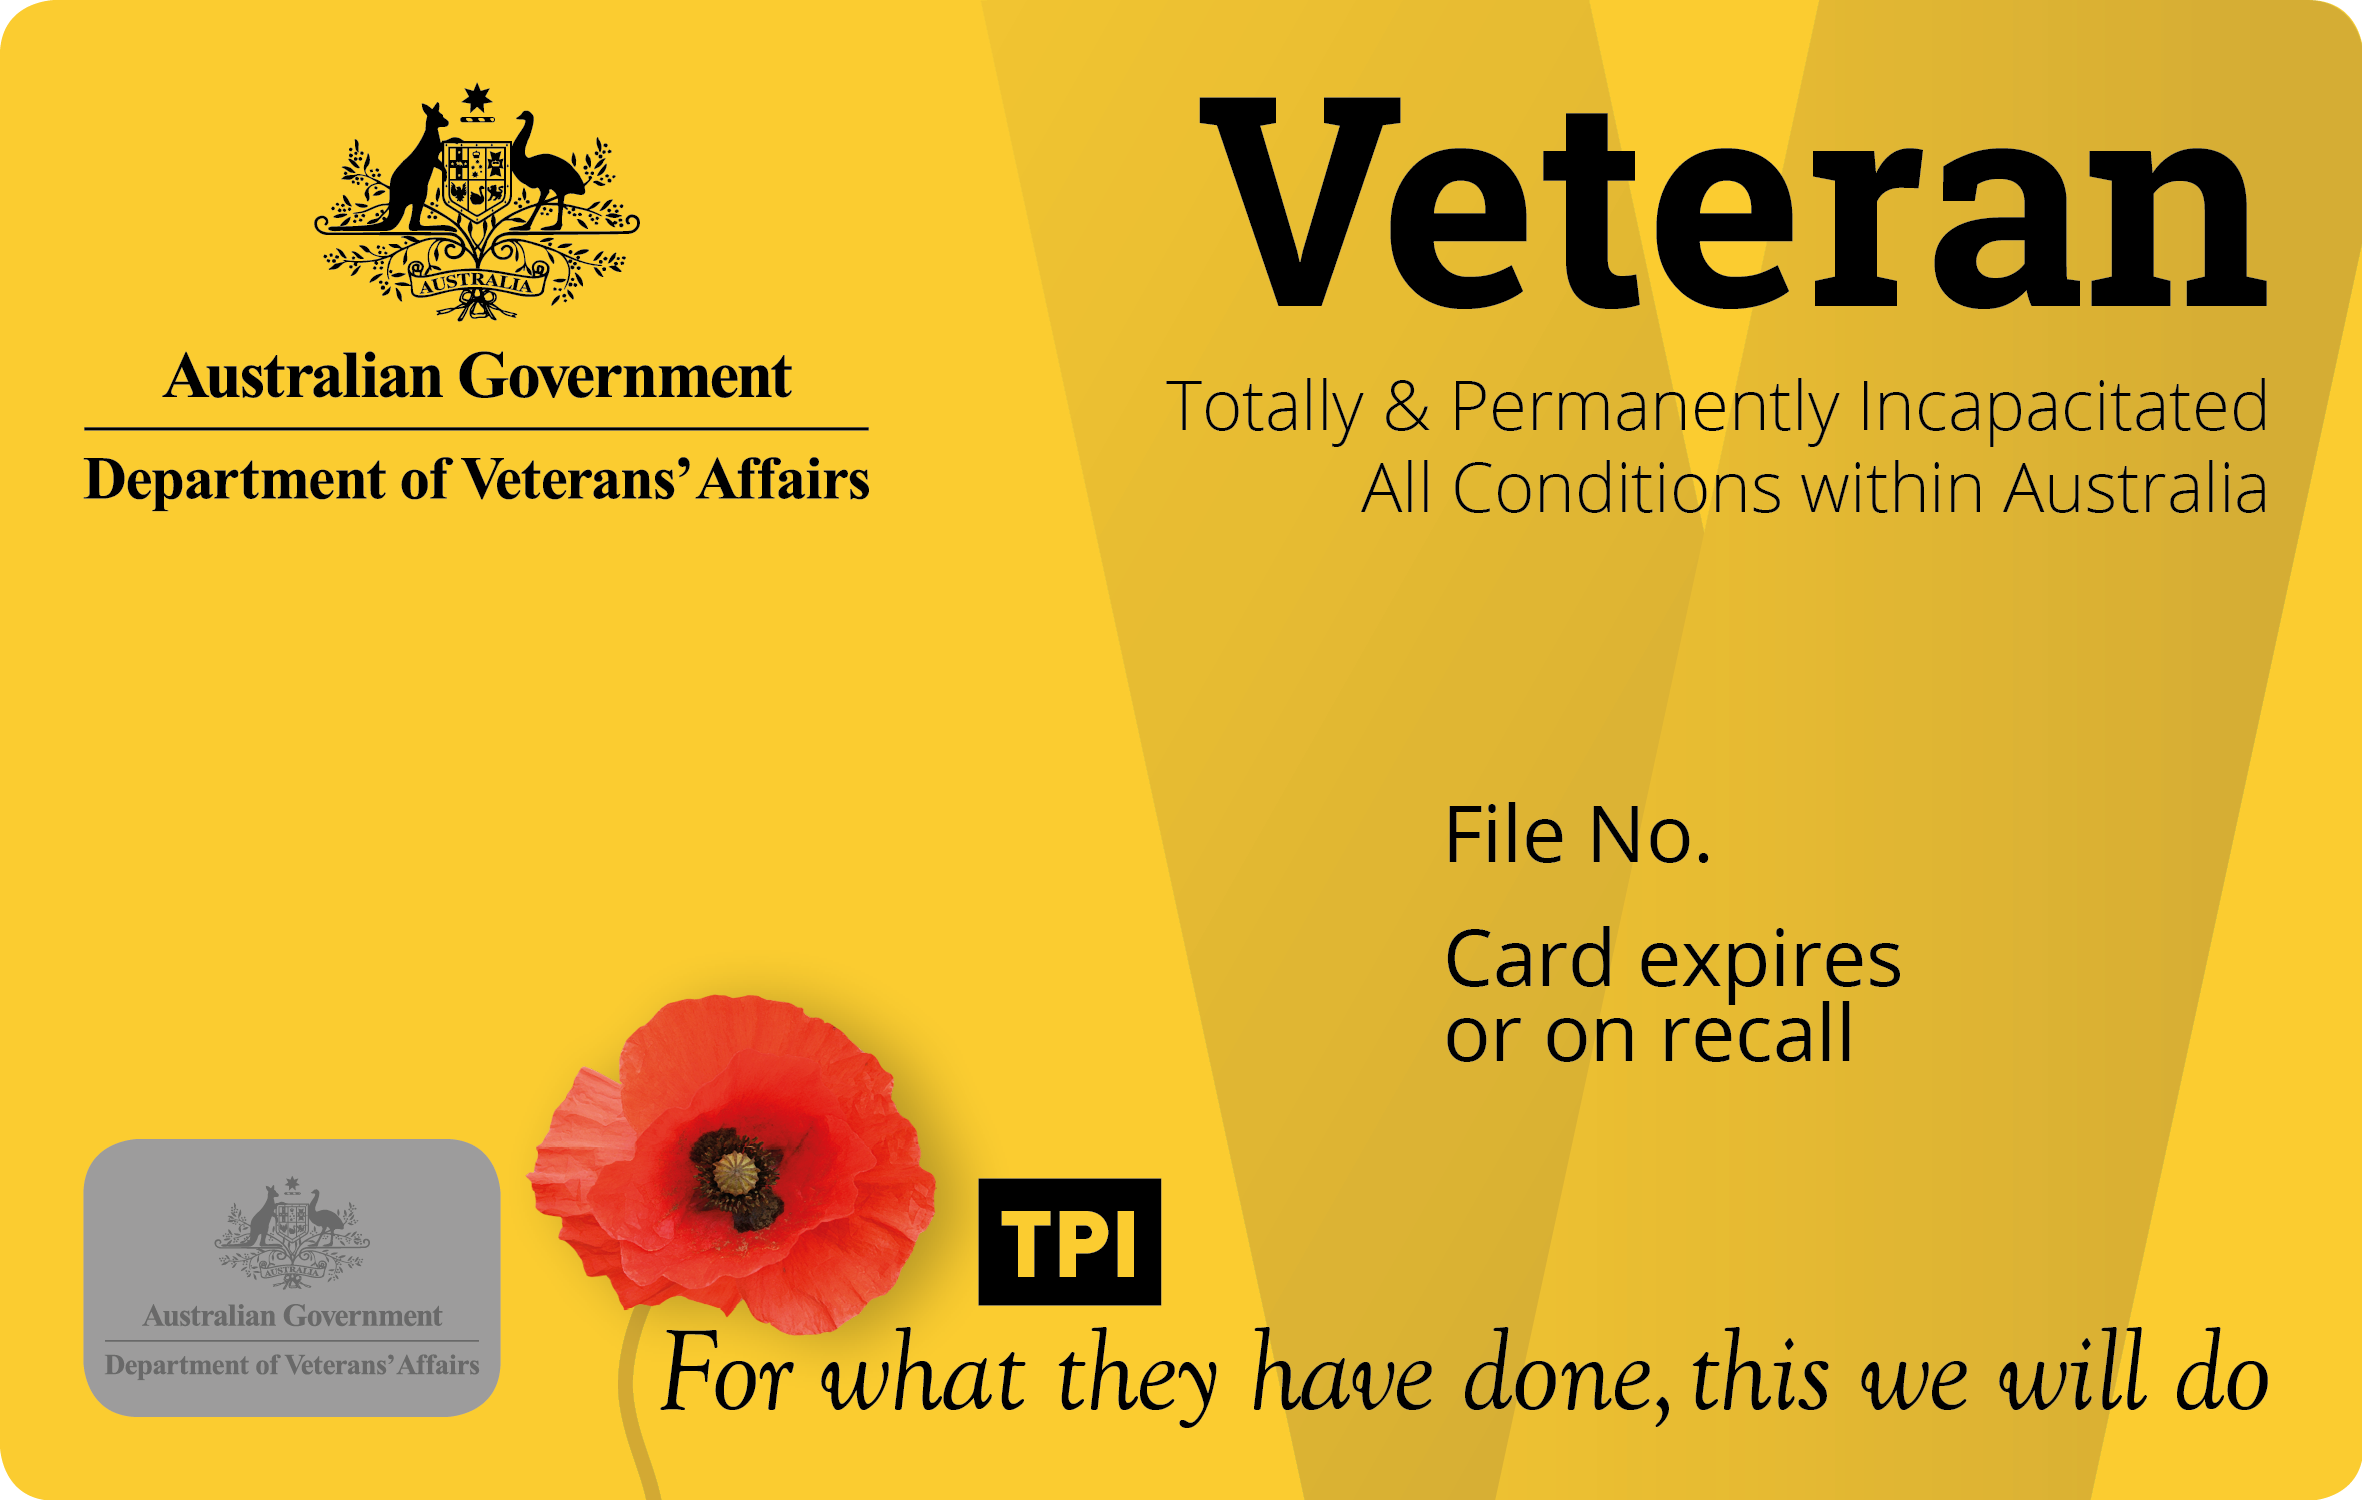 Commonwealth Department of Veterans' Affairs Gold Treatment Card endorsed "Totally and Permanently Incapacitated"